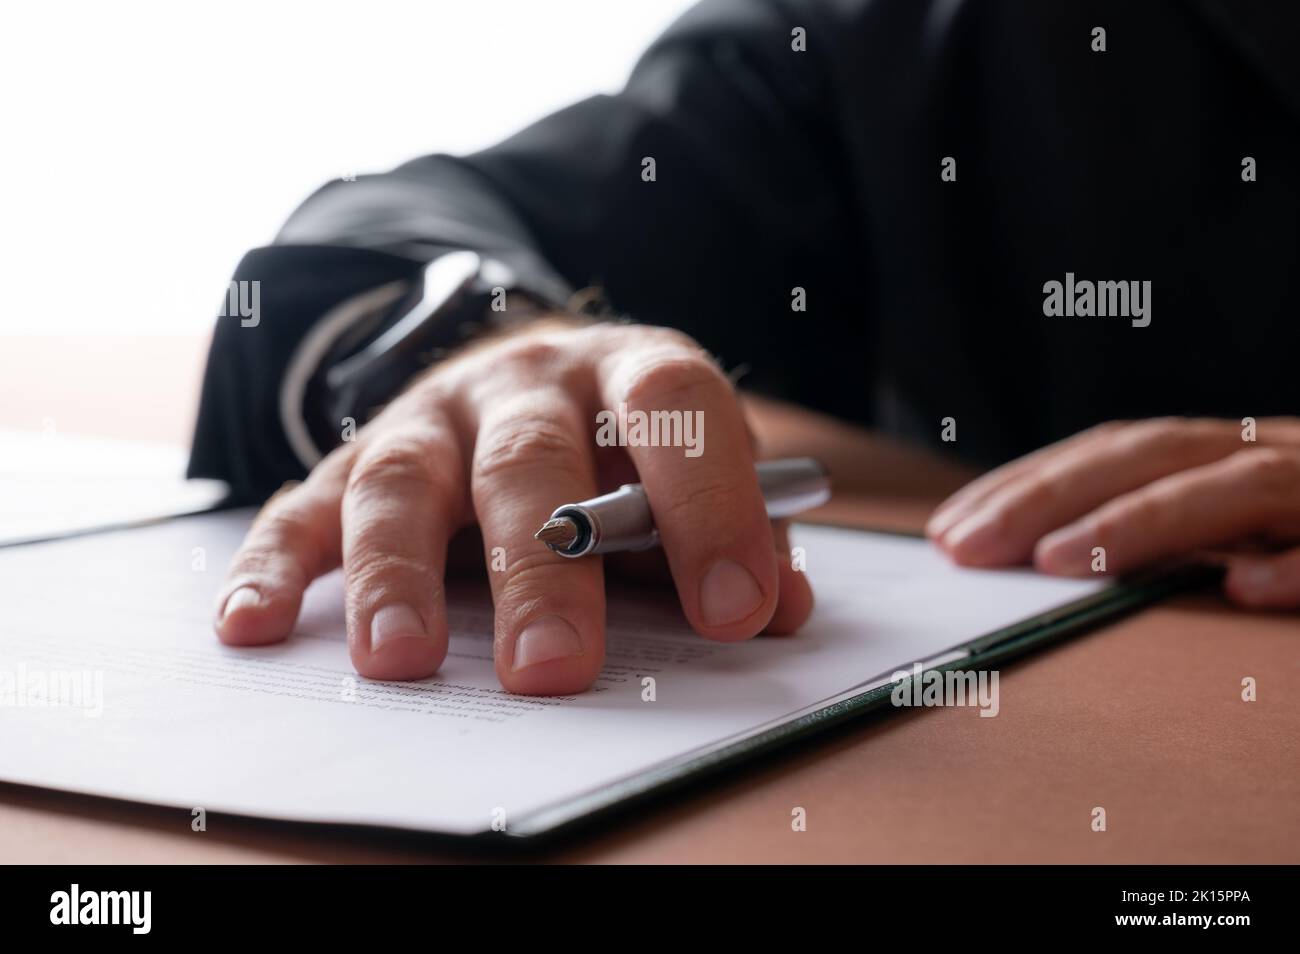 Low angle closeup view of a businessman holding a pen proofreading a contract or document in a folder. Stock Photo